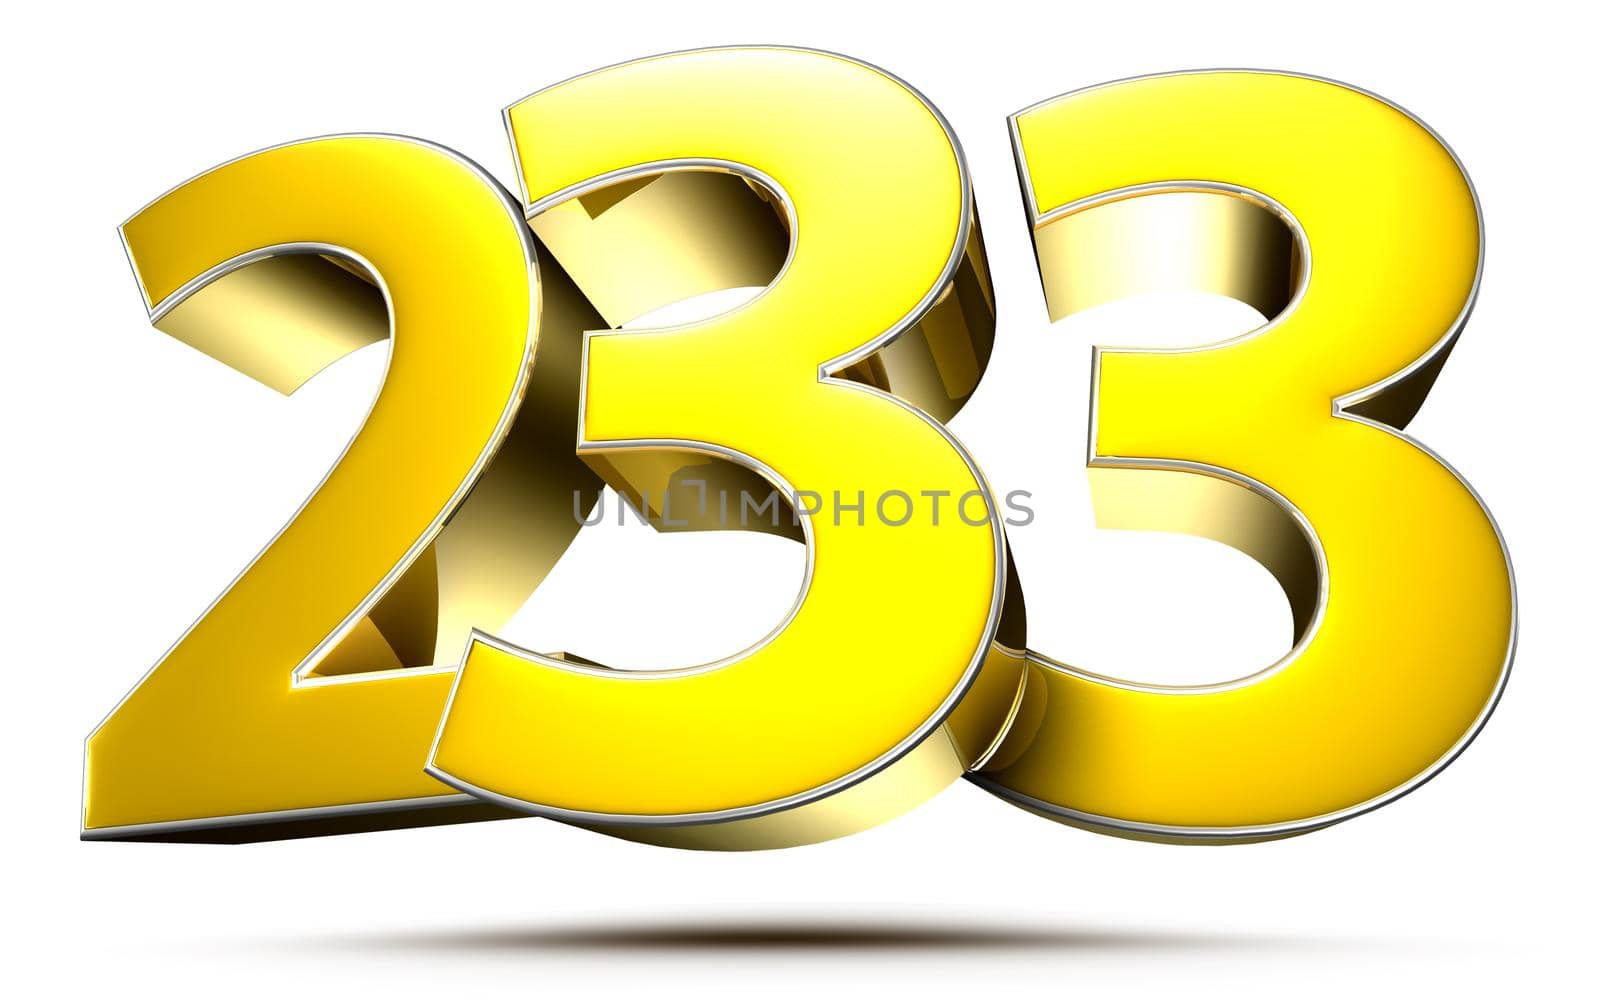 233 gold 3D illustration on white background with clipping path. by thitimontoyai